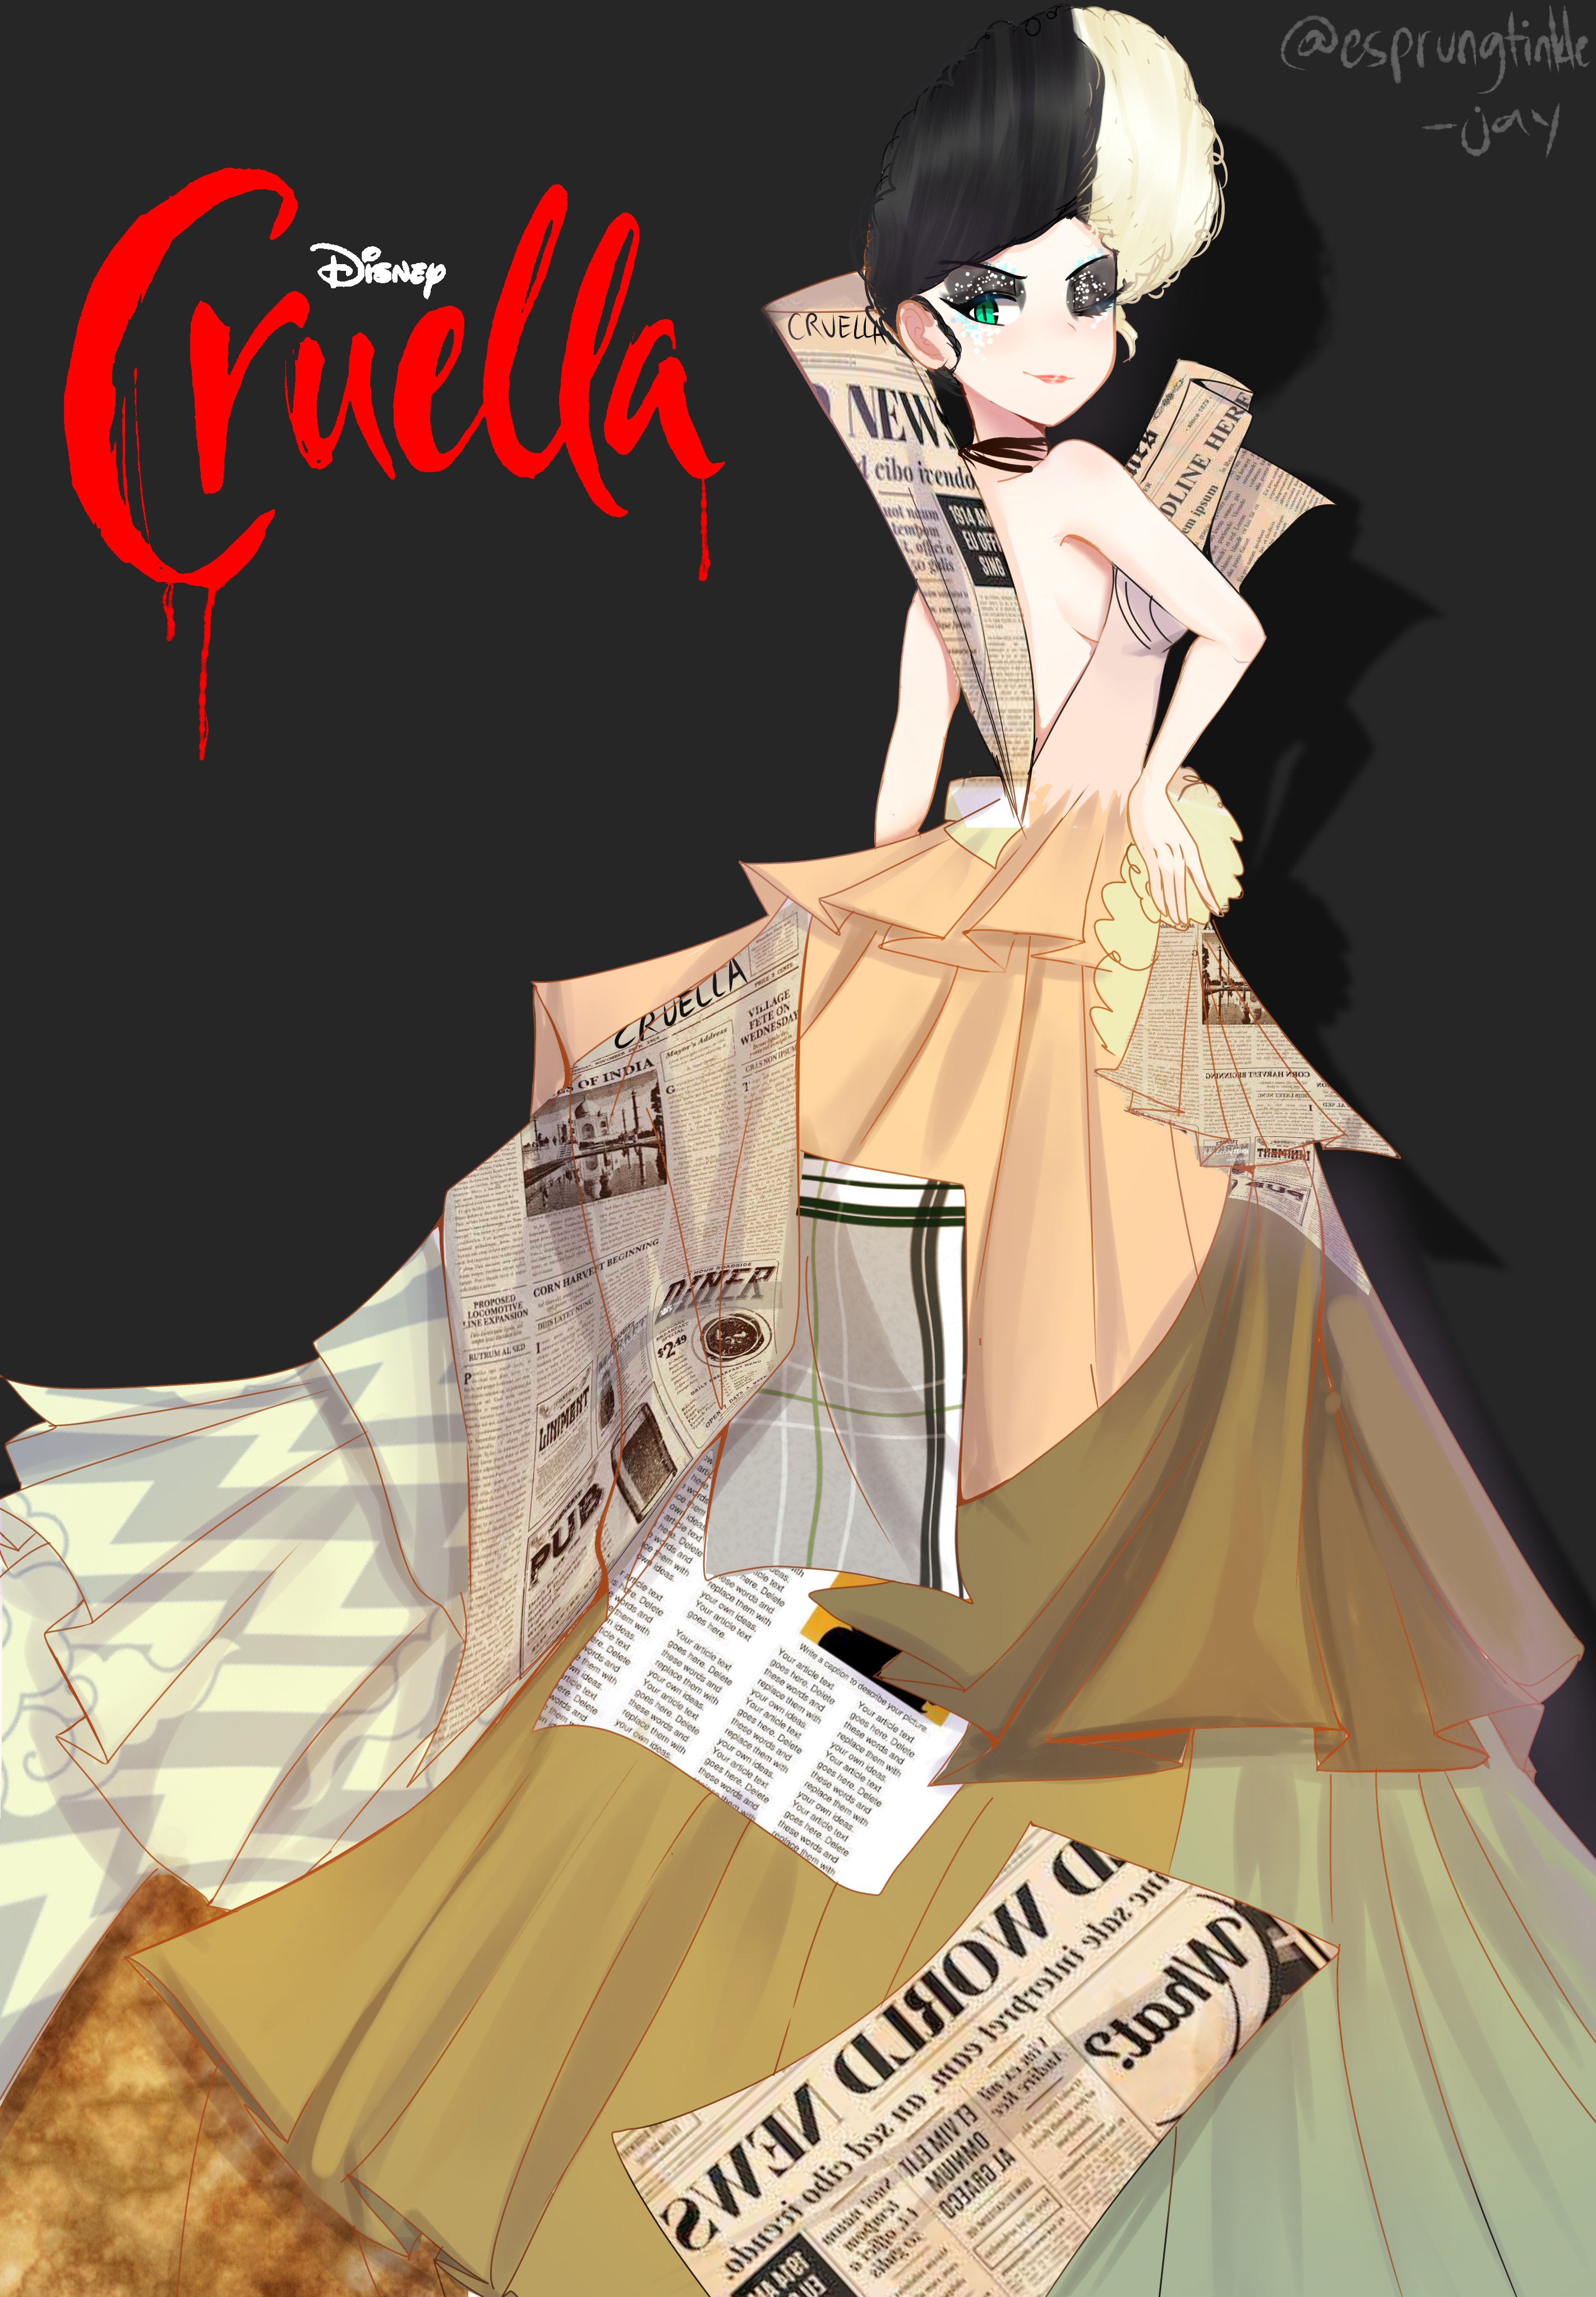 X 上的Jay!🇵🇭🇯🇵//commission open//：「Drawing Cruella Fanart and her Garbage  Dress (my personal favorite) I saw the movie the ending shook me tho :0  hope u guys like it #fanart #art #ArtistO